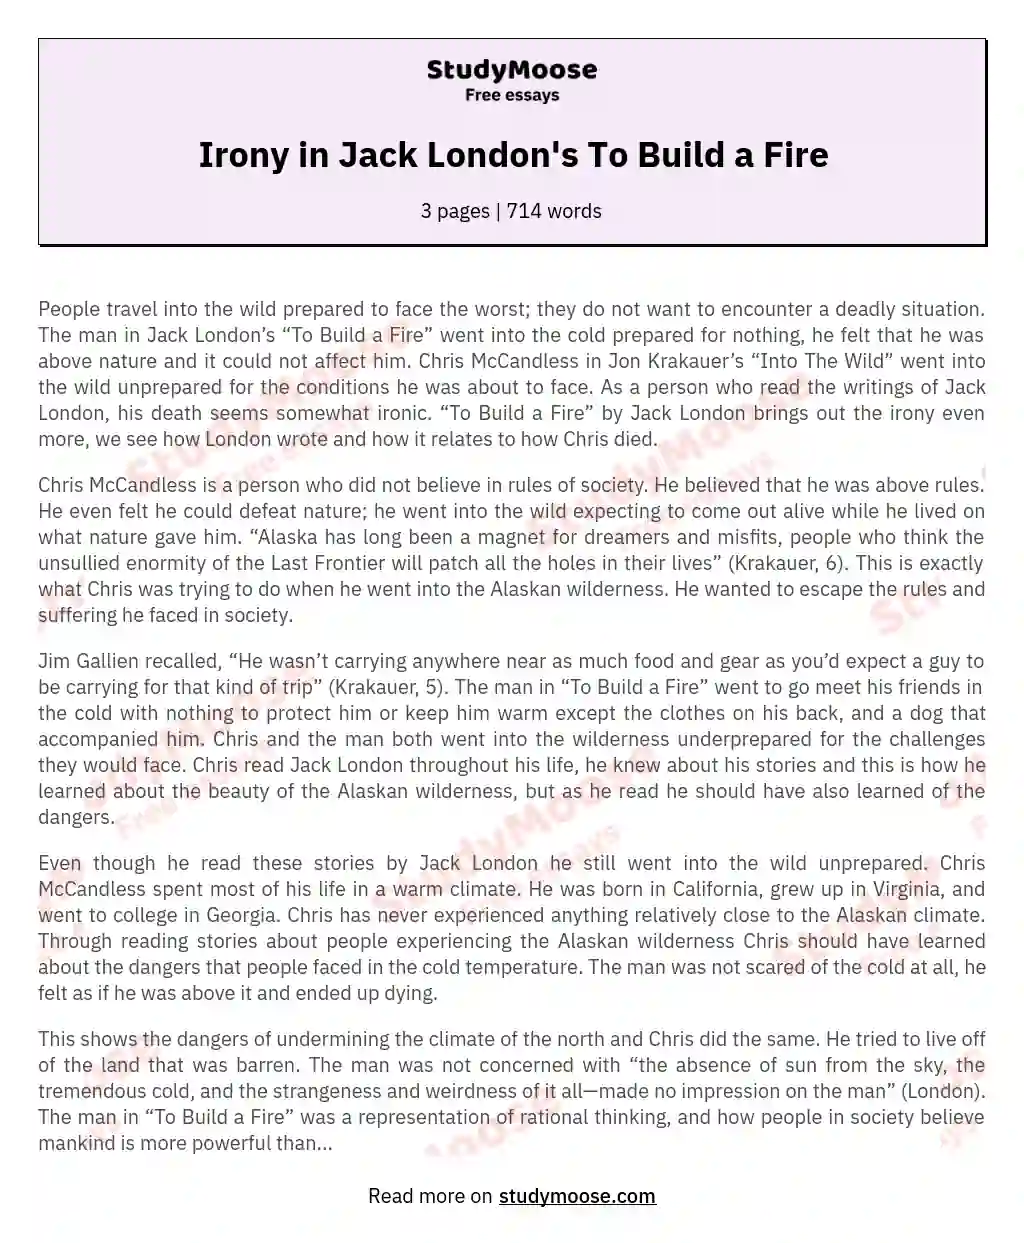 Irony in Jack London's To Build a Fire